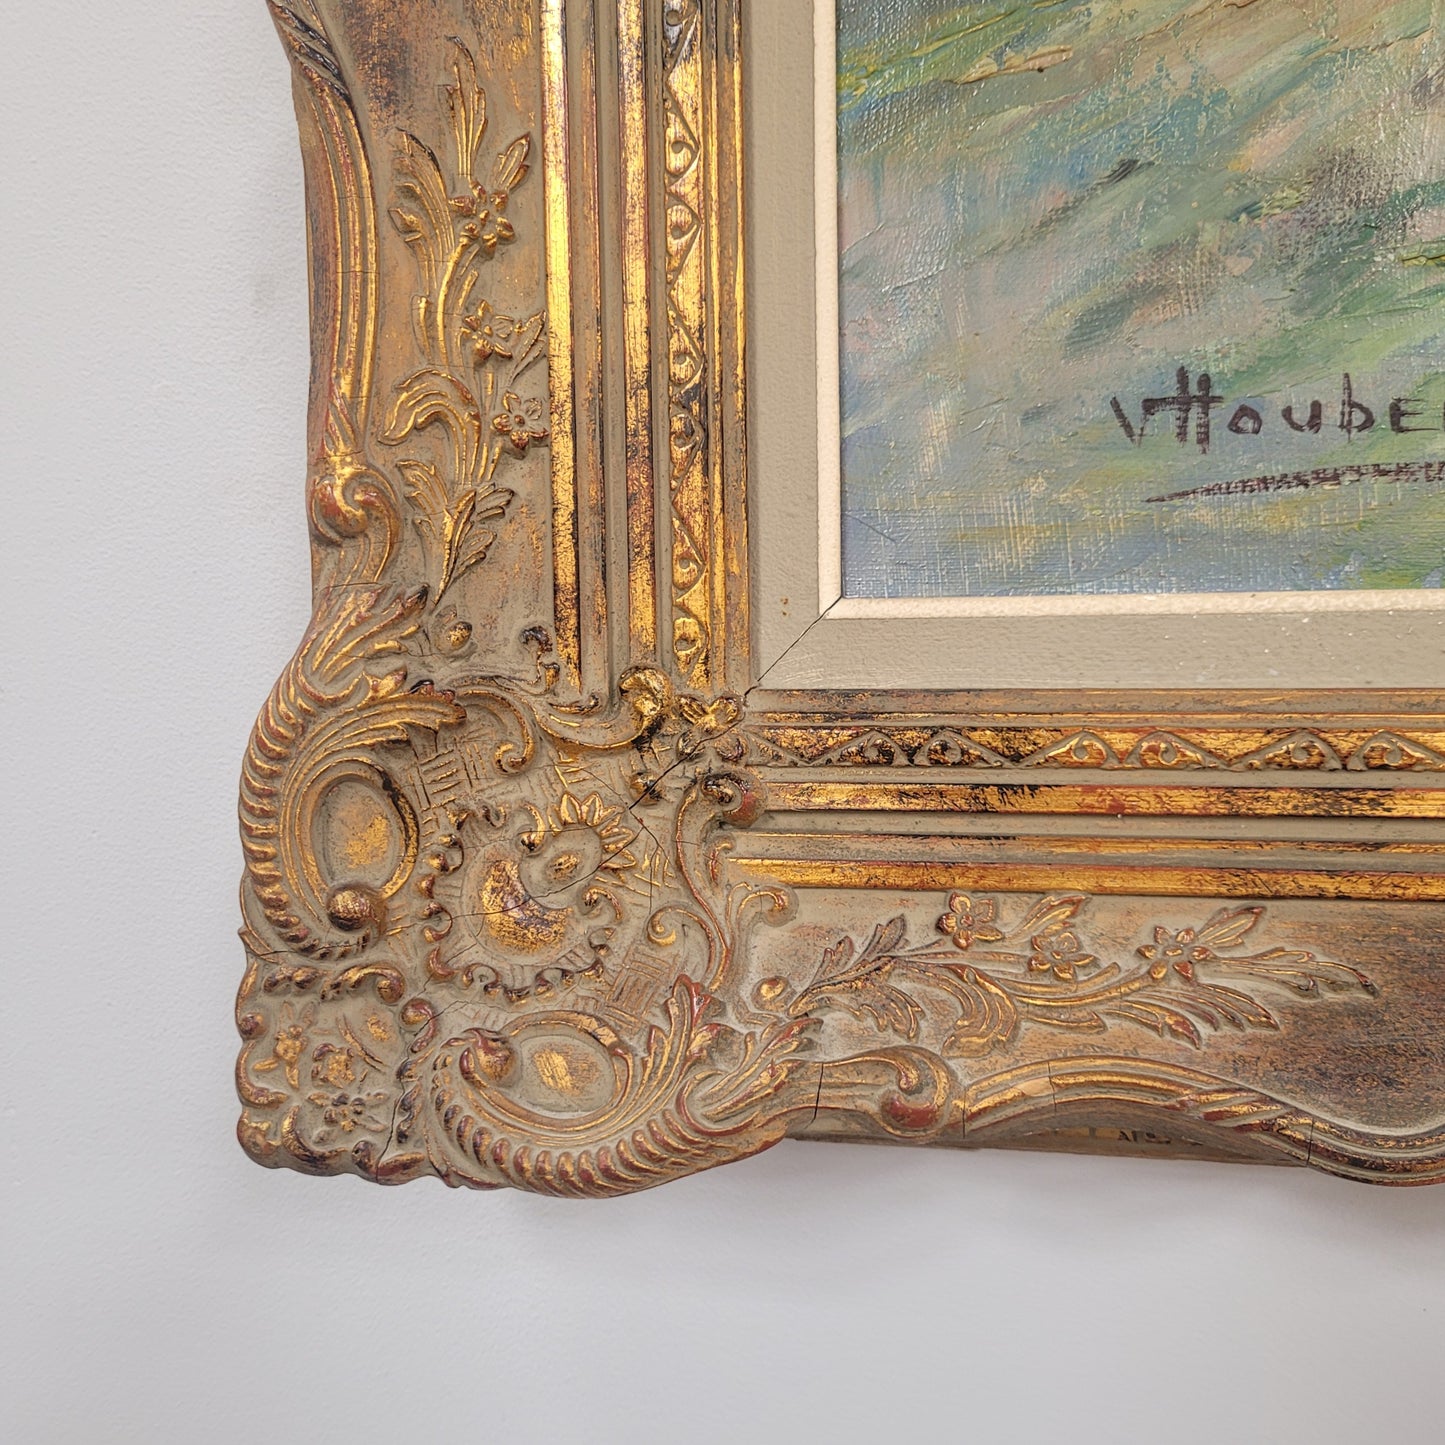 Stunning Oil on Canvas Floral in Decorative Frame